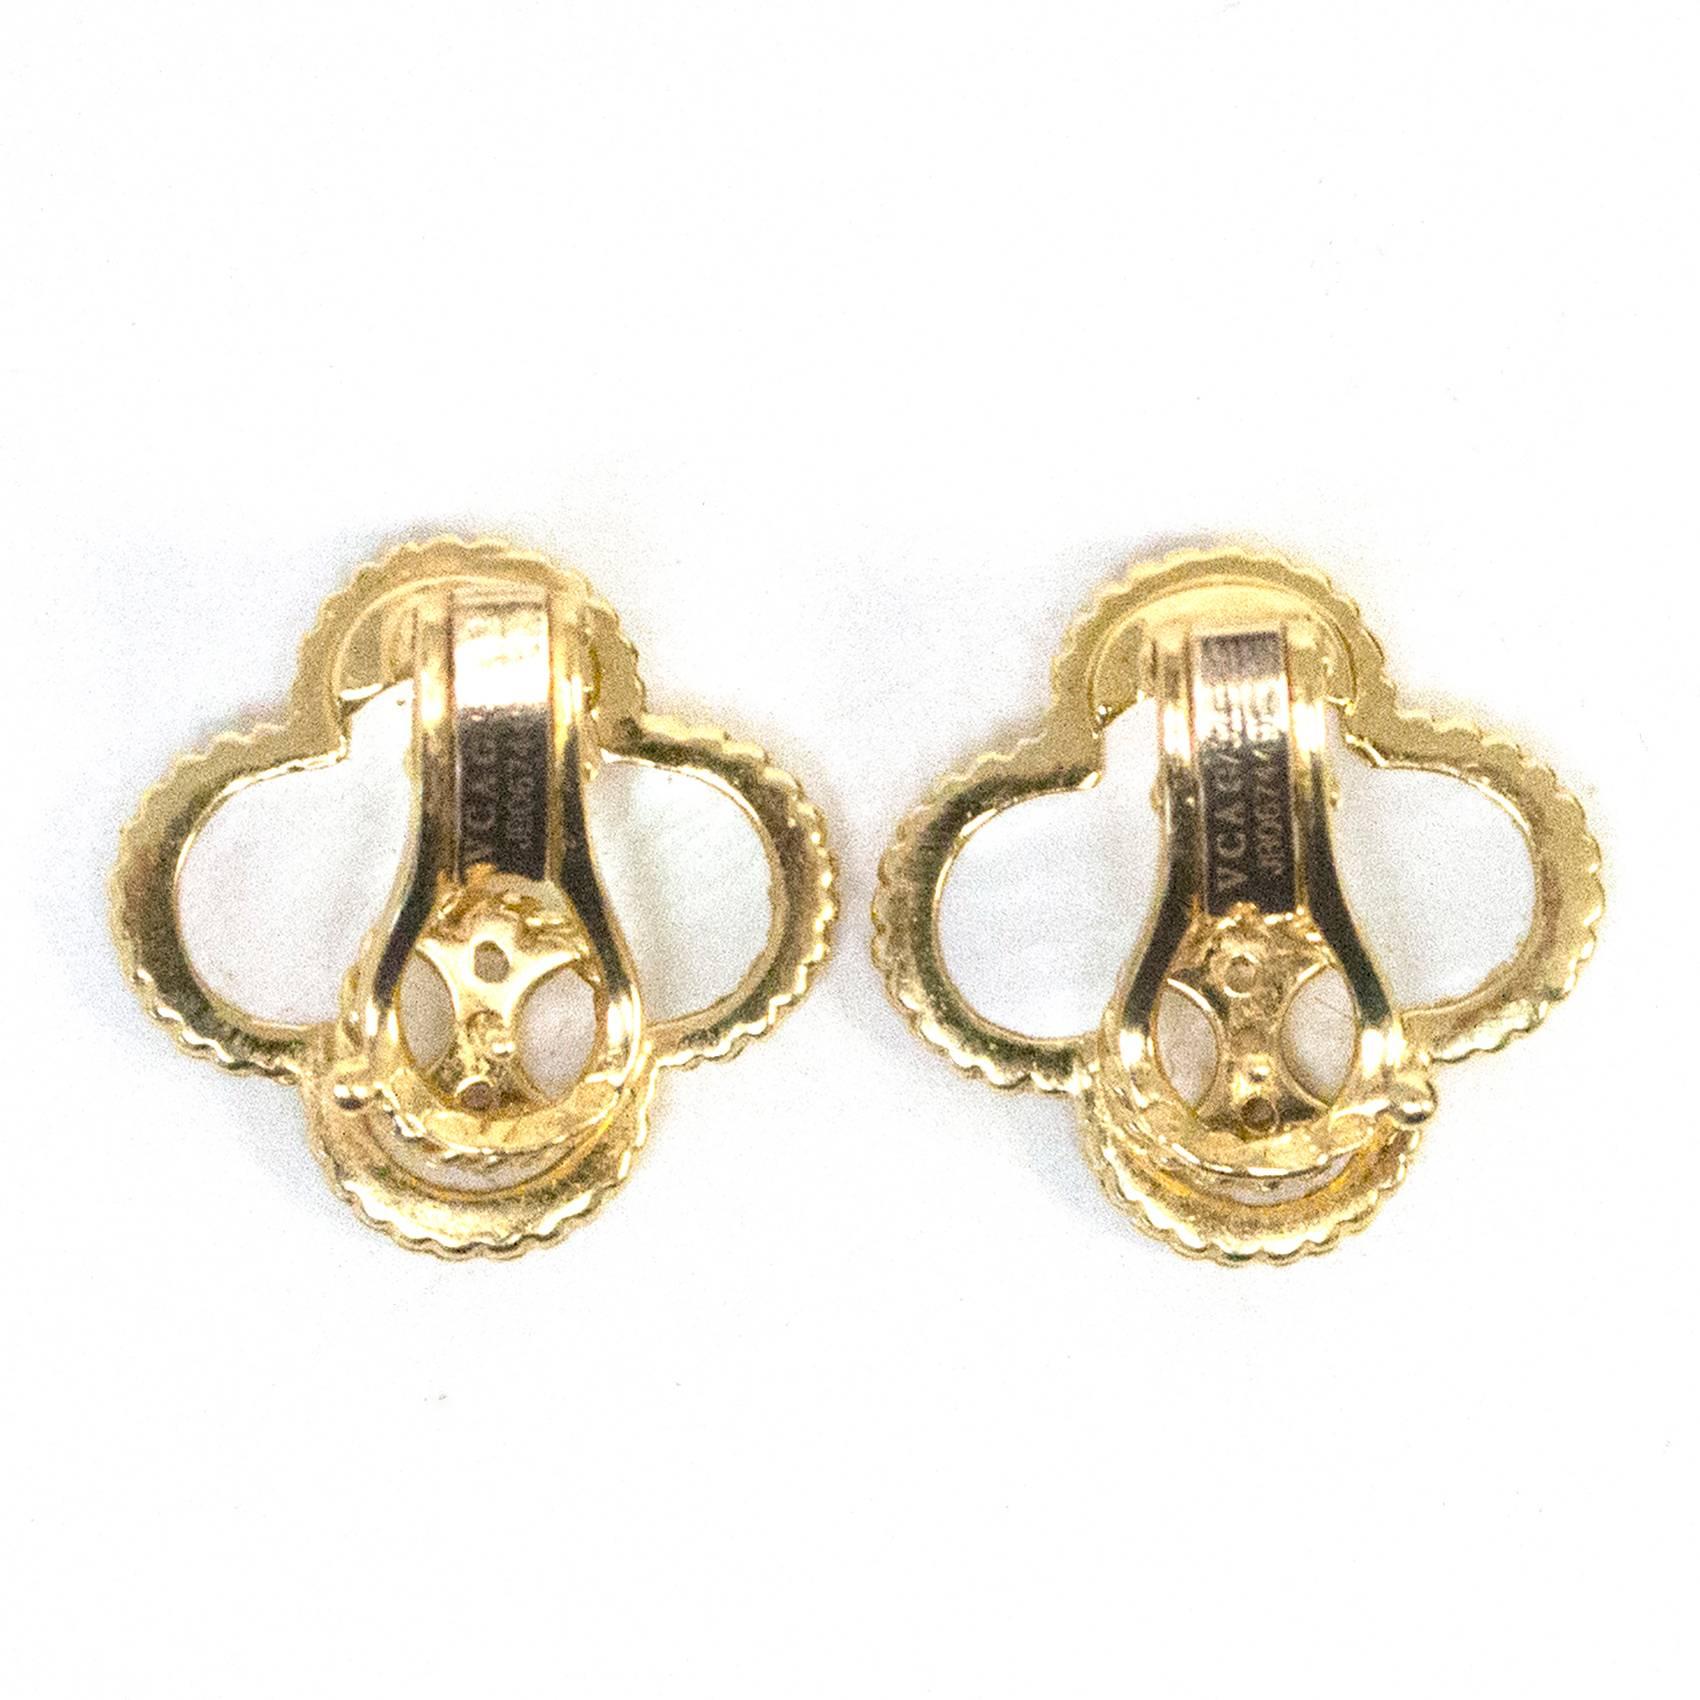 Van Cleef & Arpels 'Magic Alhambra' ear-clips in 18 carat yellow gold and white mother-of-pearl. Beautiful mother of pearl in iconic flower shape surrounded by yellow gold. Stud post and hinged backing to earrings.
These earrings are sold out and